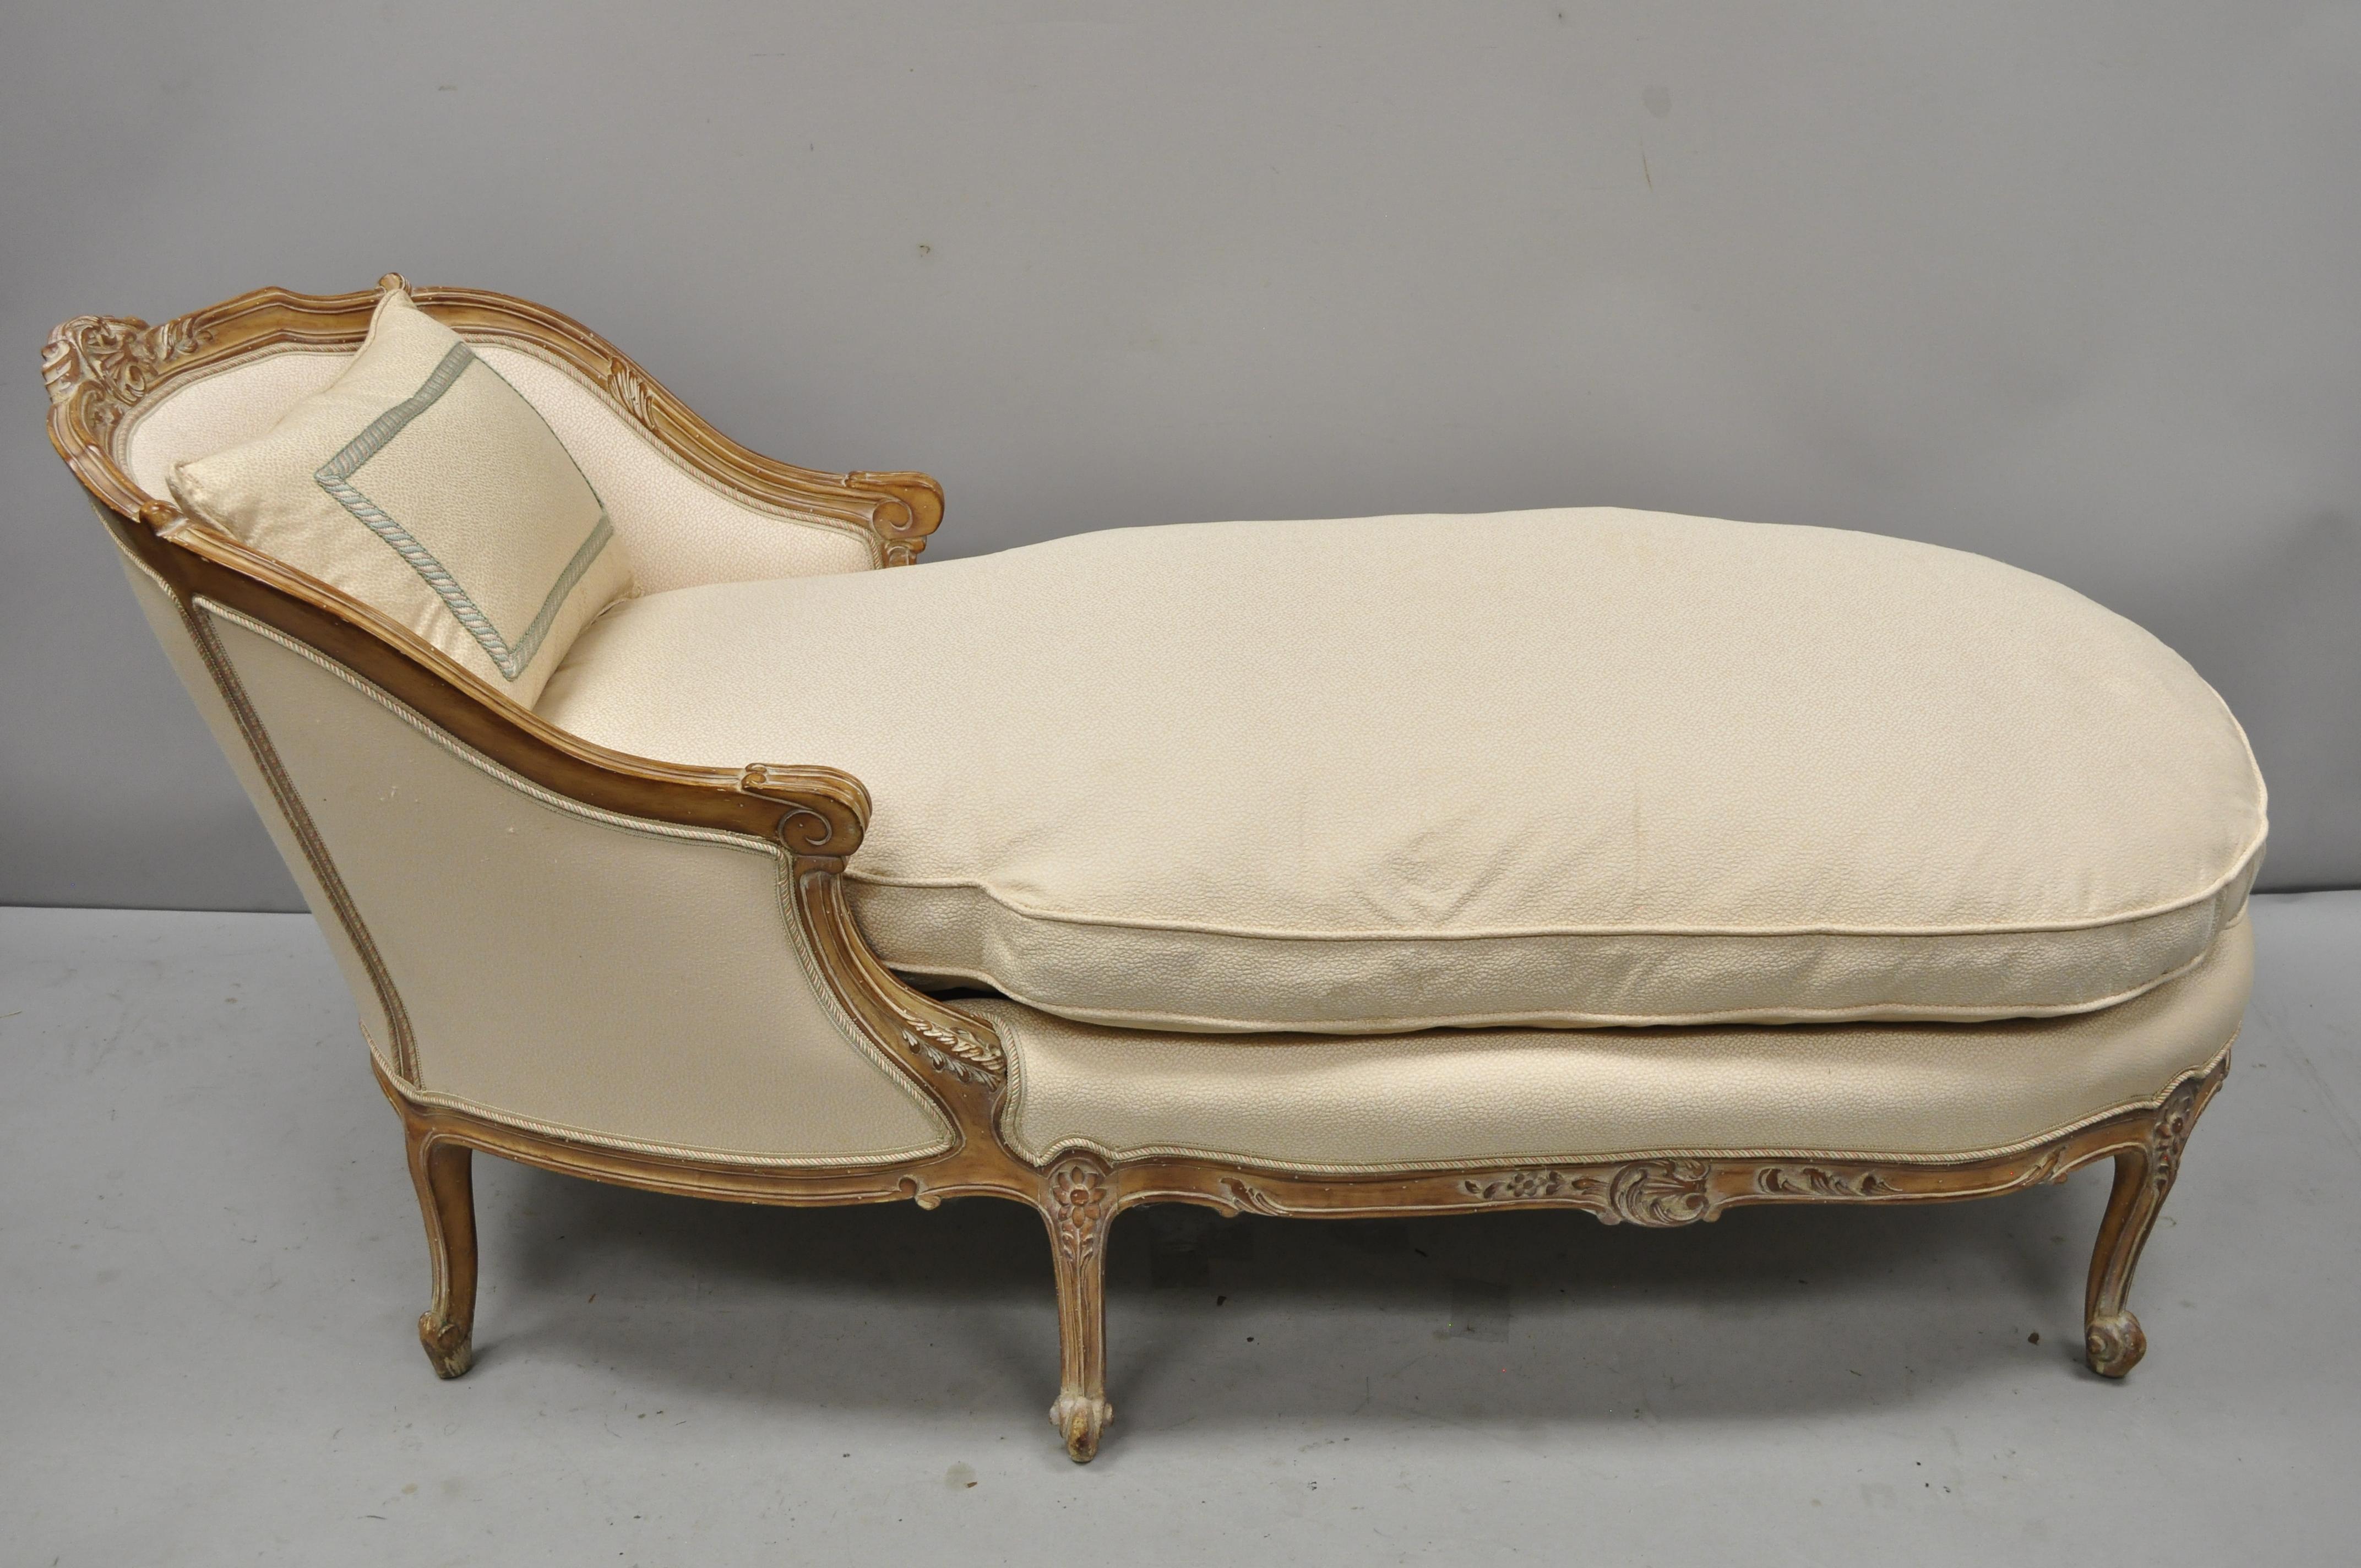 Vintage French Louis XV Style Down Filled Cushion Distress Painted Recamier Chaise Lounge Fainting Couch. Item features down filled cushion, solid wood frame, distress finish, finely carved details, 6 cabriole legs, great style and form. Circa Mid